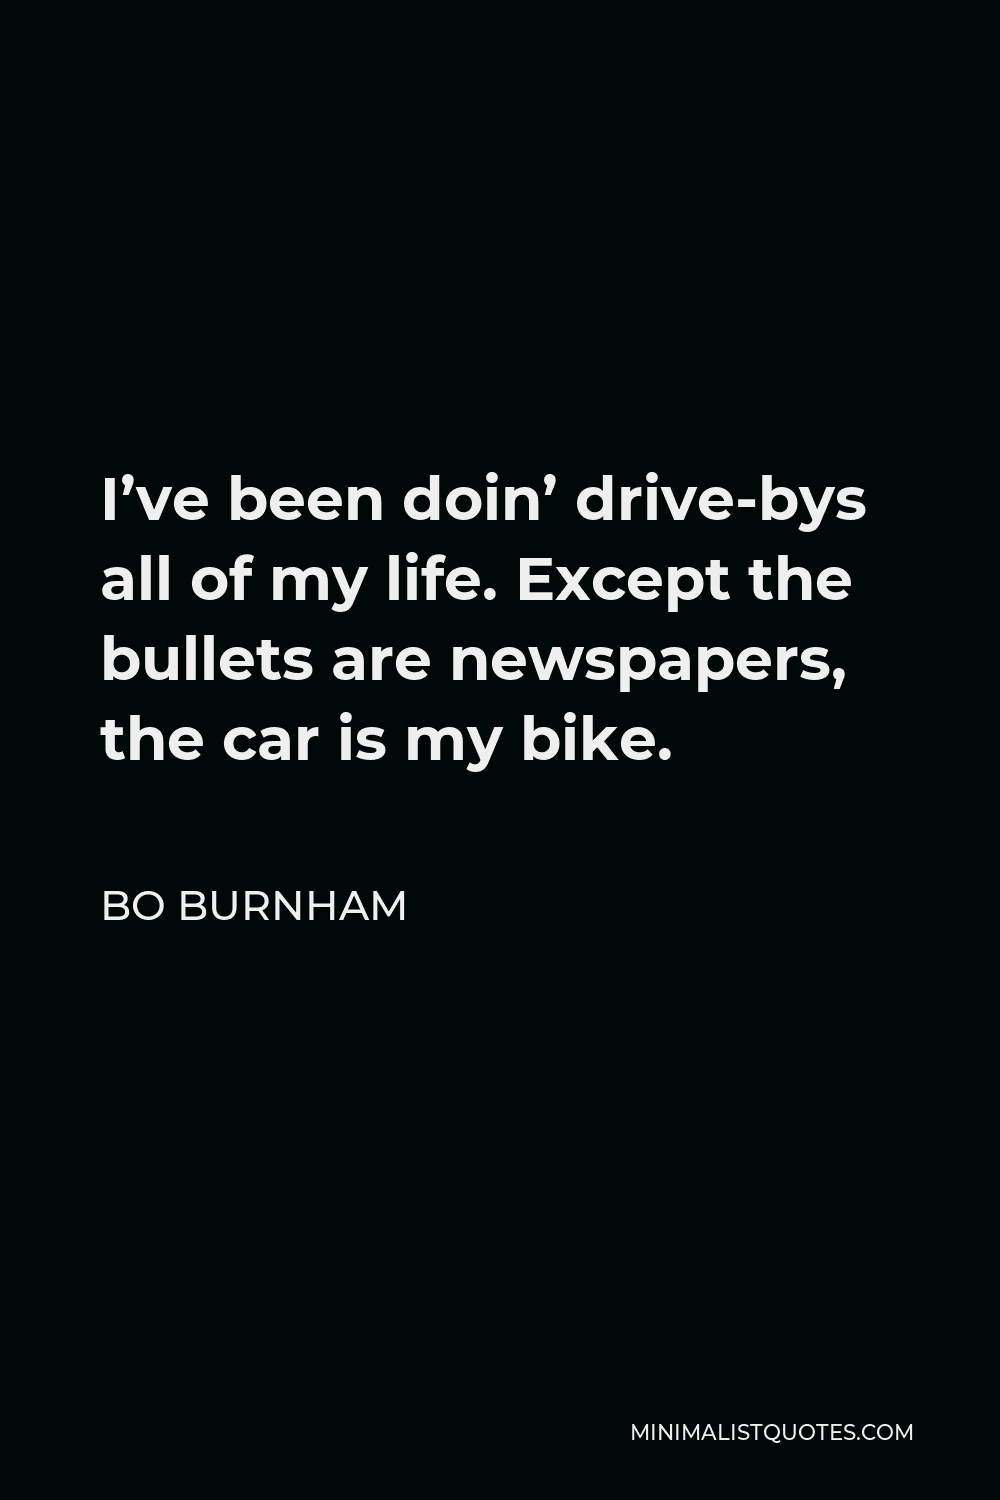 Bo Burnham Quote - I’ve been doin’ drive-bys all of my life. Except the bullets are newspapers, the car is my bike.